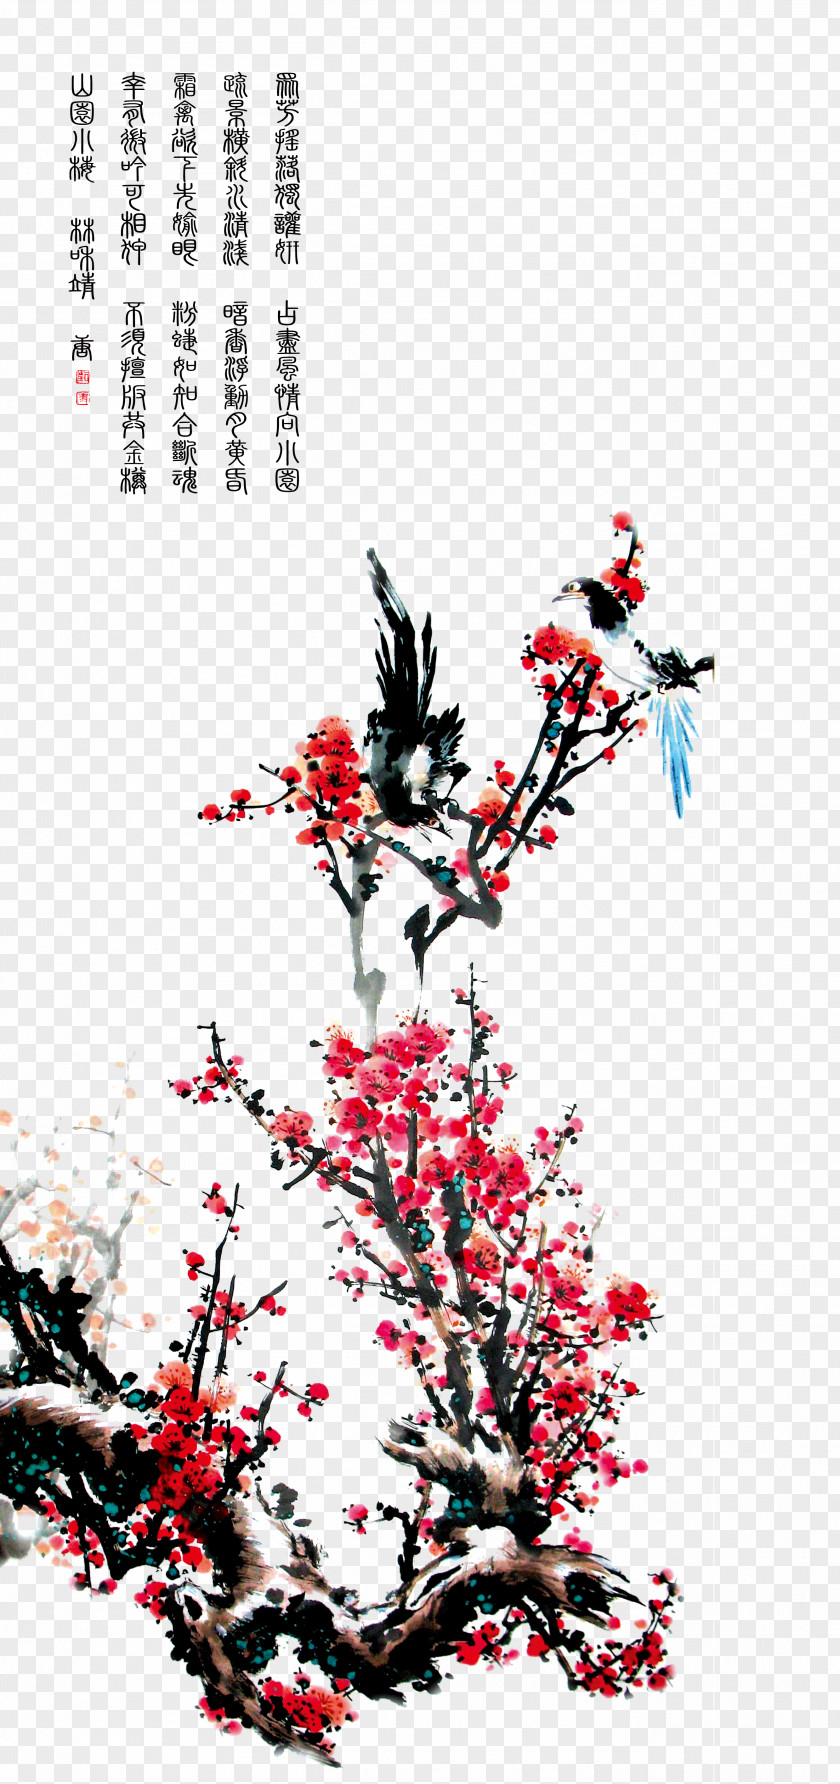 Chinese Calligraphy And Painting Style Plum New Year Greeting Card Years Day PNG